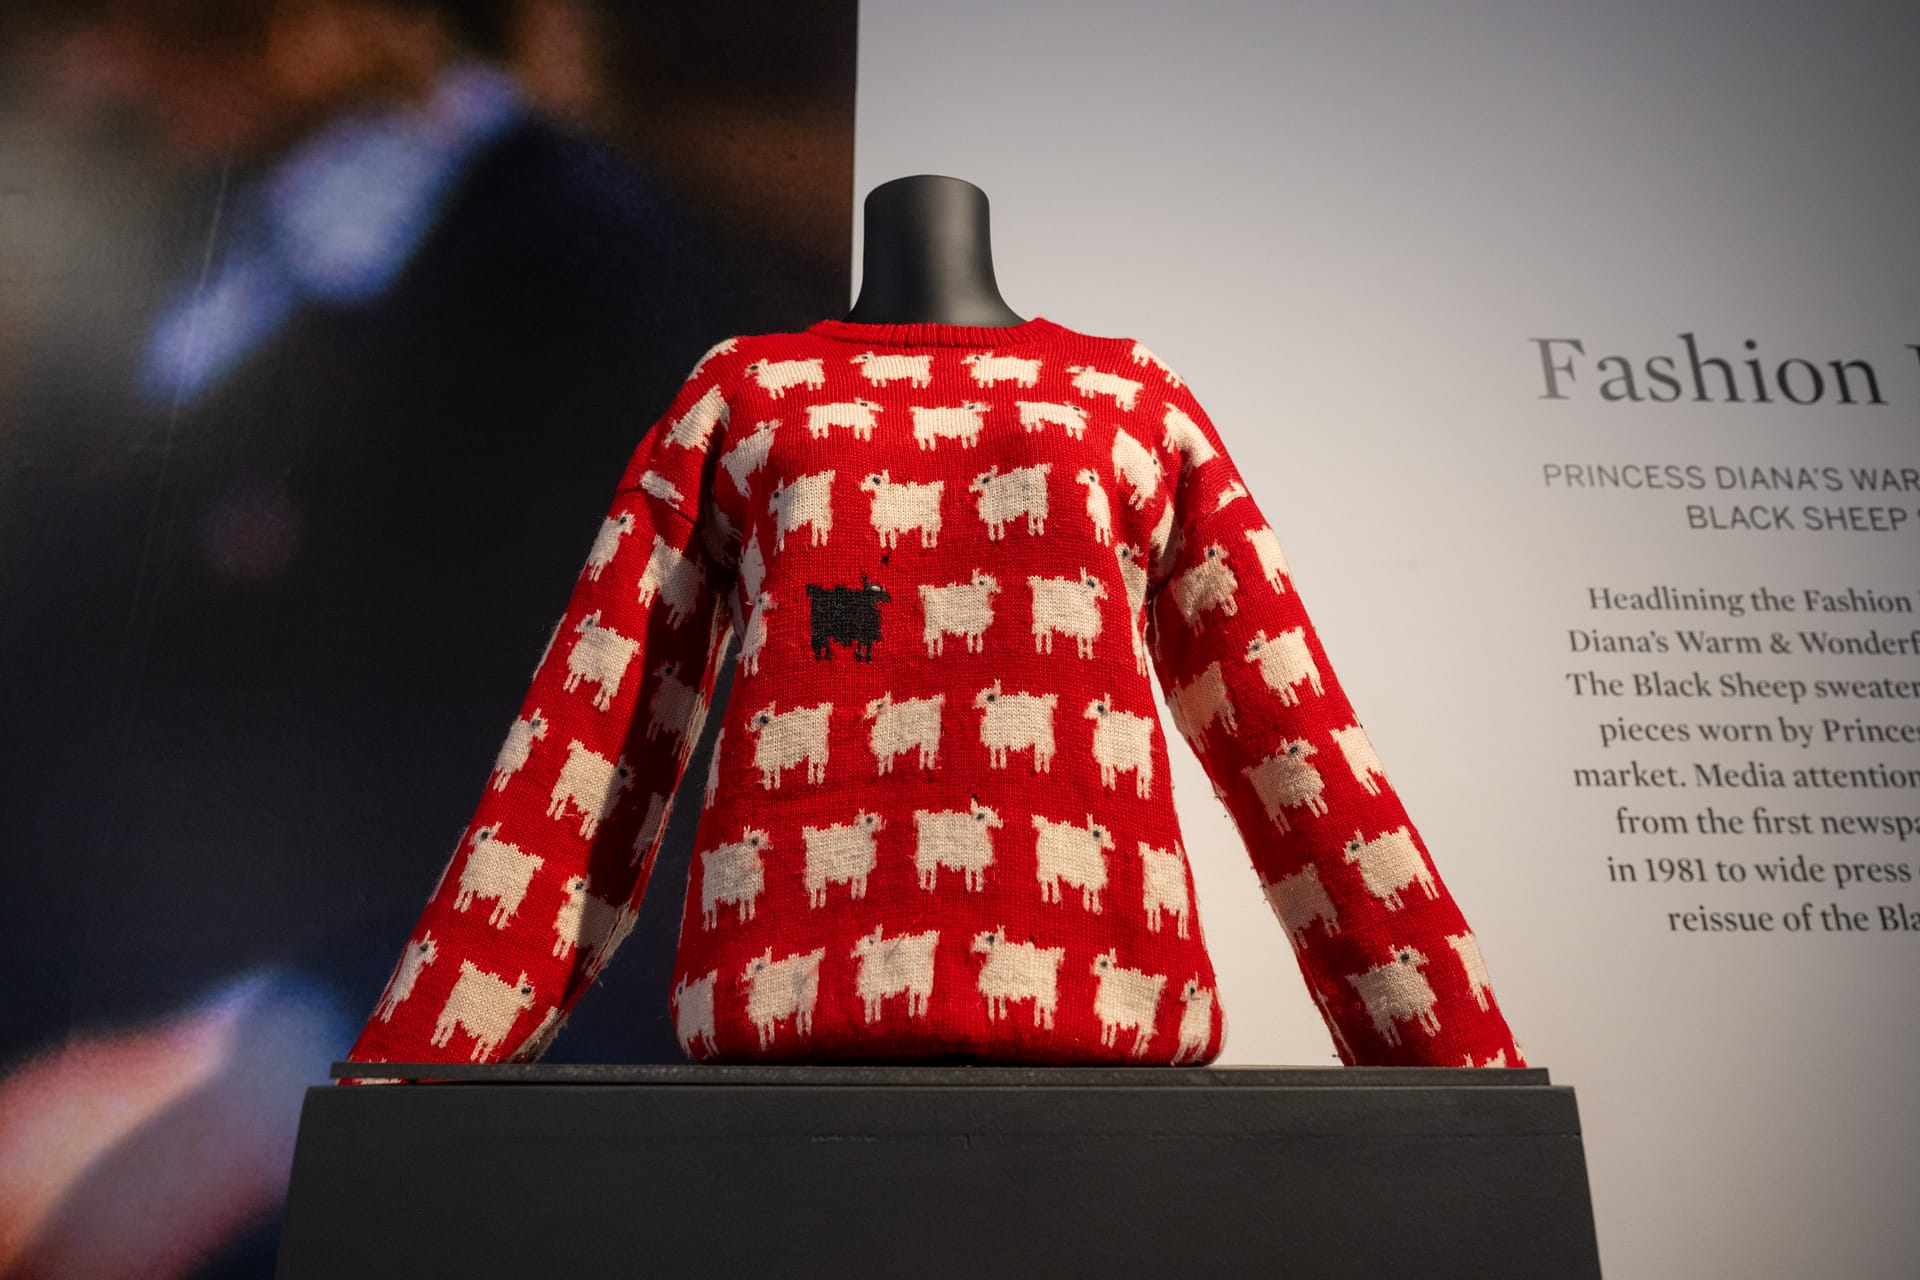 Princess Diana’s ‘Black Sheep’ Sweater Sells for $1.1 M. at Sotheby’s